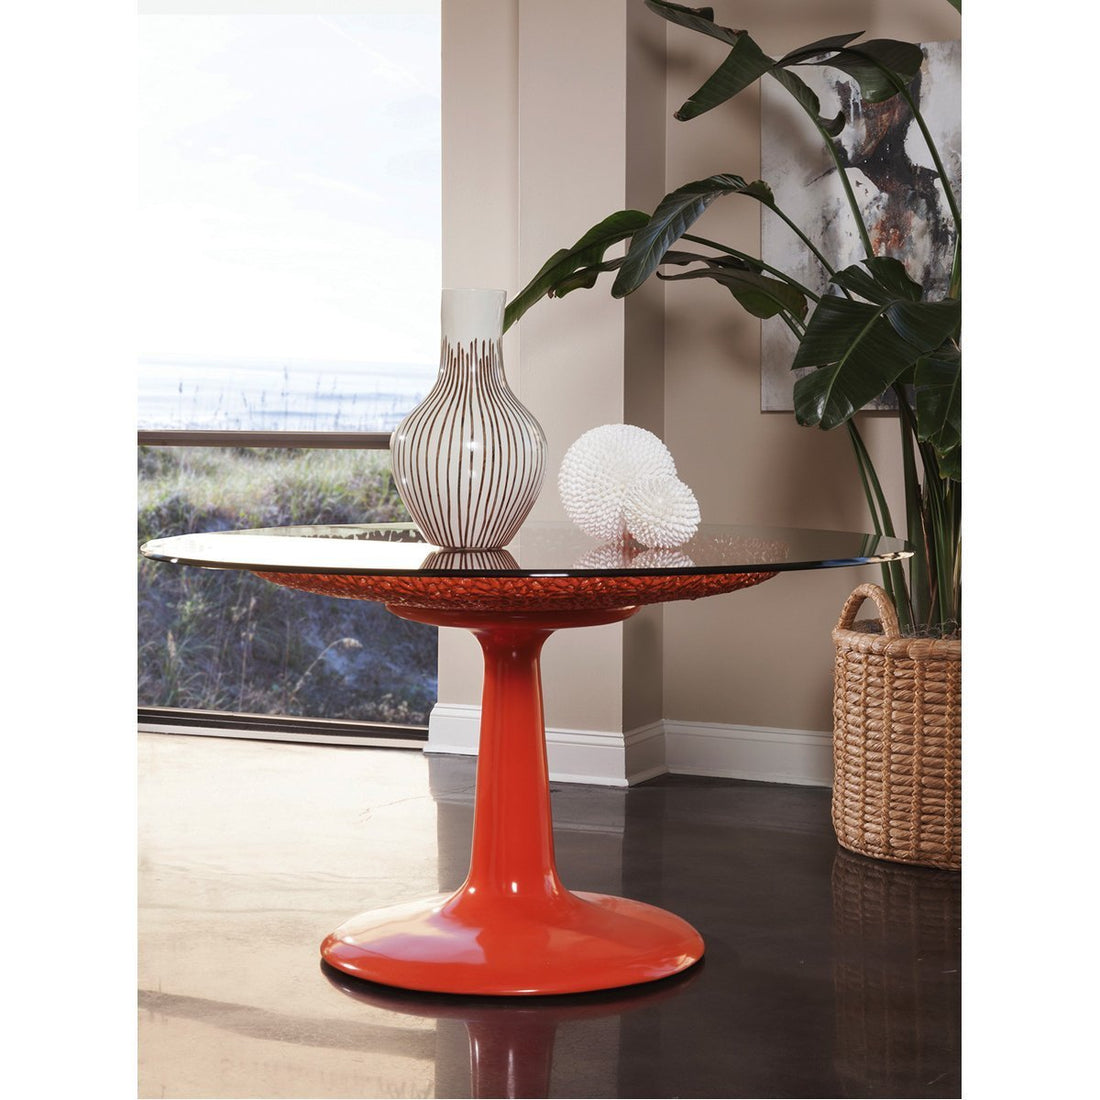 Artistica Home Seascape Round Dining Table